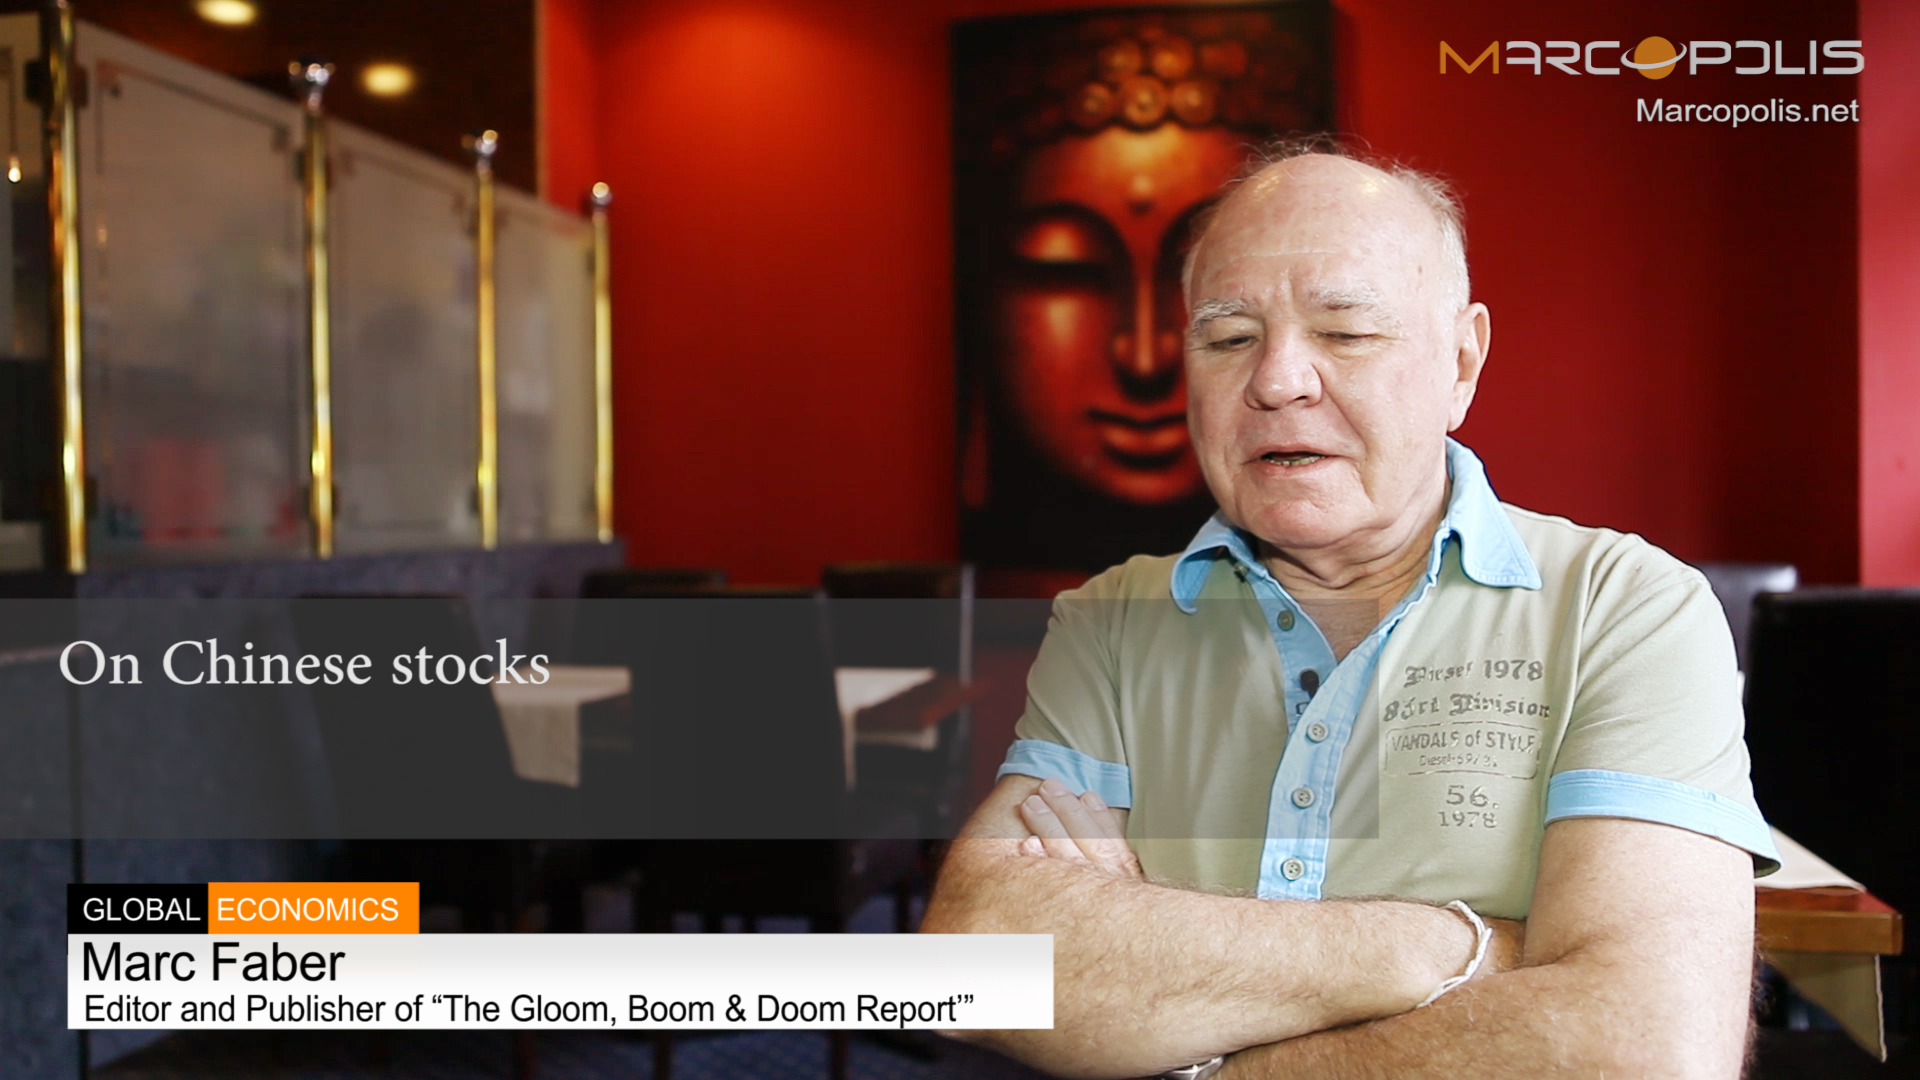 Marc Faber on Chinese stocks